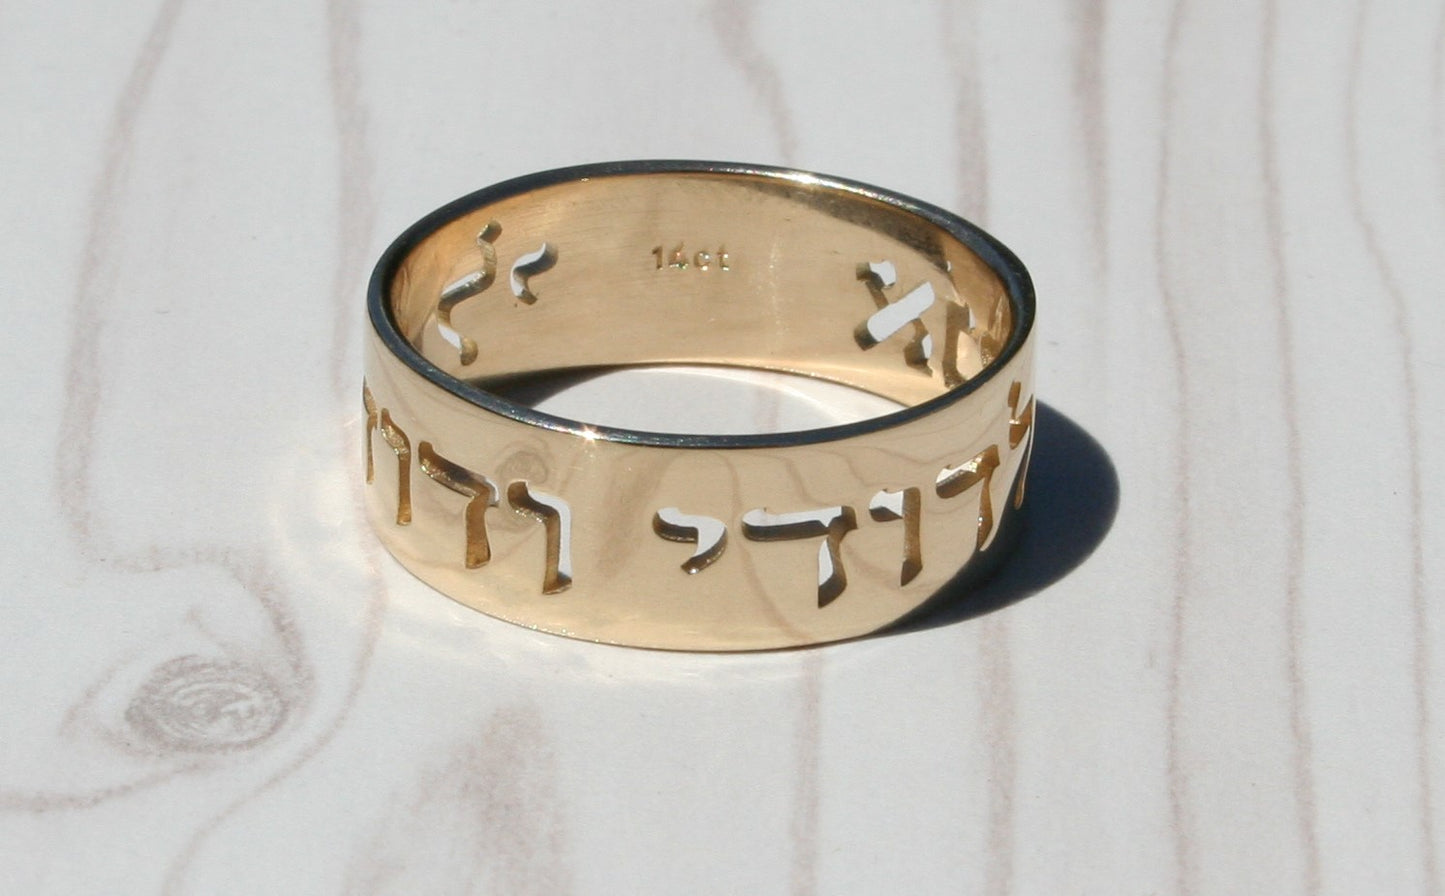 Song of Songs 6:3 I am my beloved's and my beloved is mine 14K Gold Ring with Hebrew Filigree Ani l'Dodi V'Dodi Li 